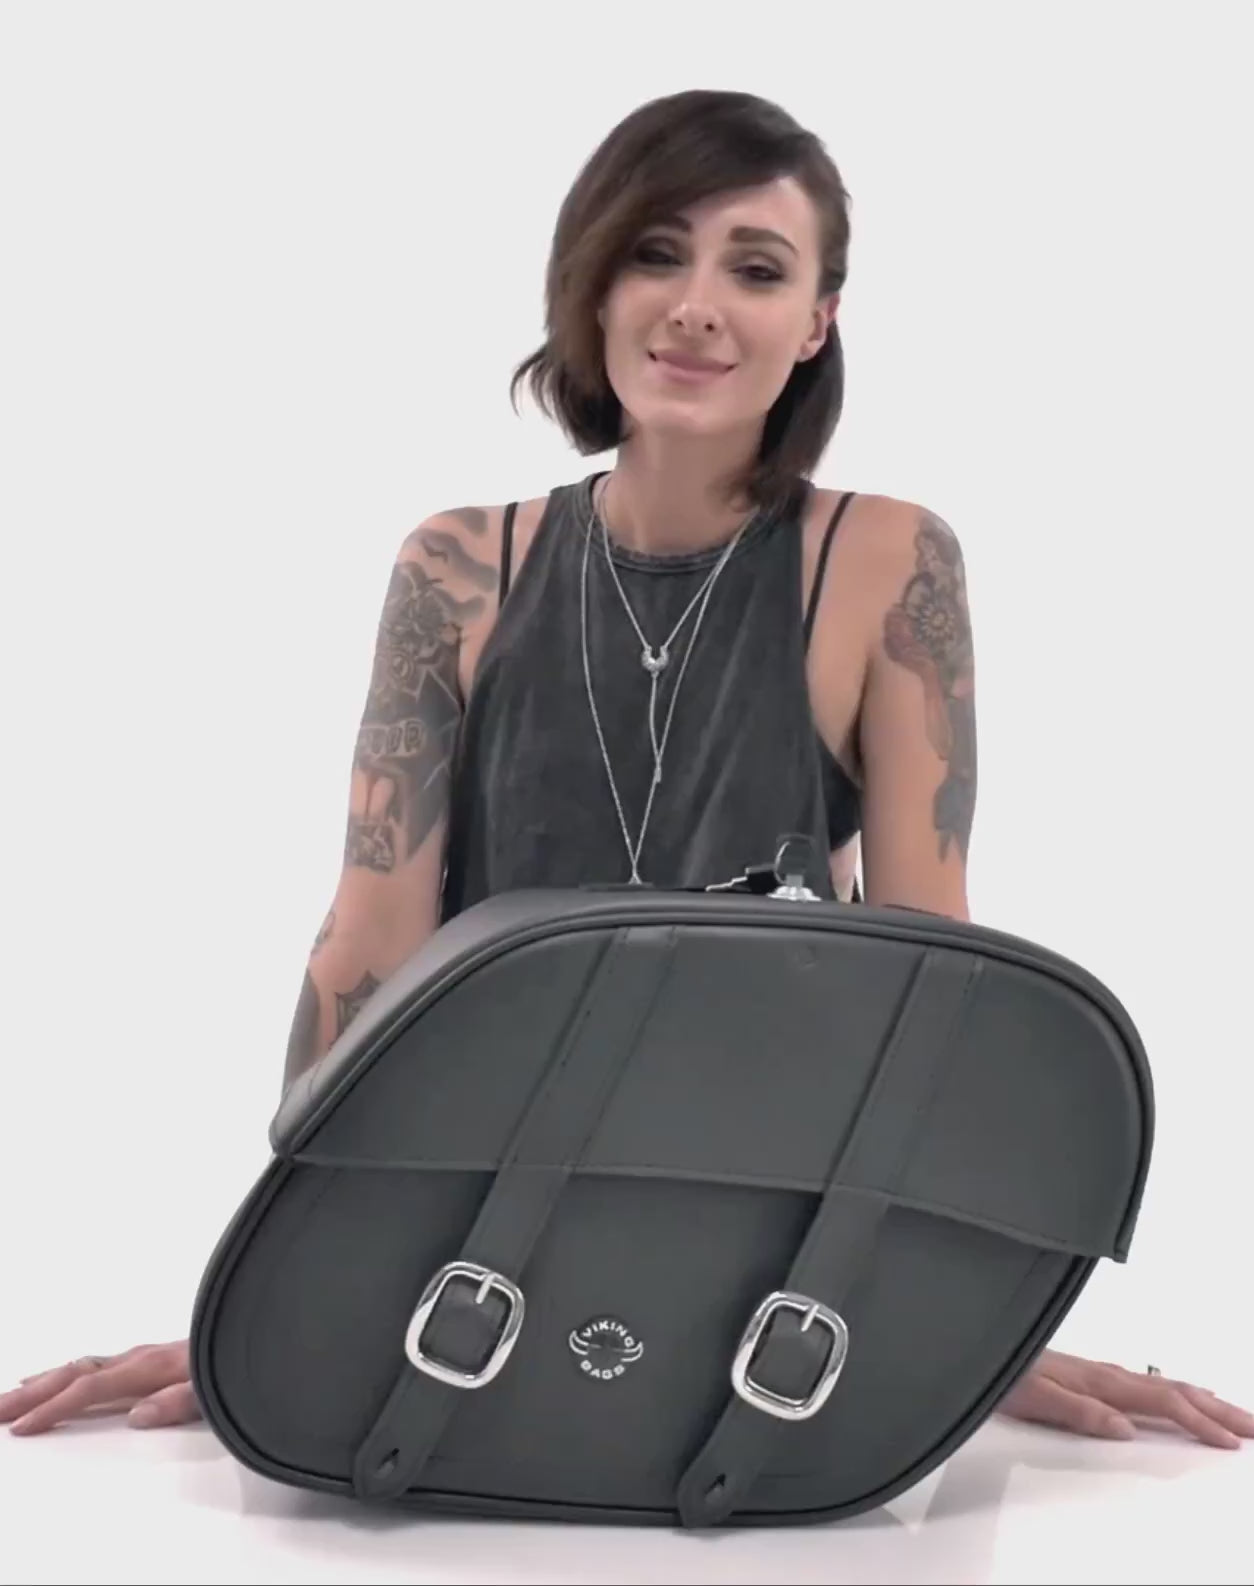 Viking Club Large Triumph Thunderbird Shock Cut-out Leather Motorcycle Saddlebags Video